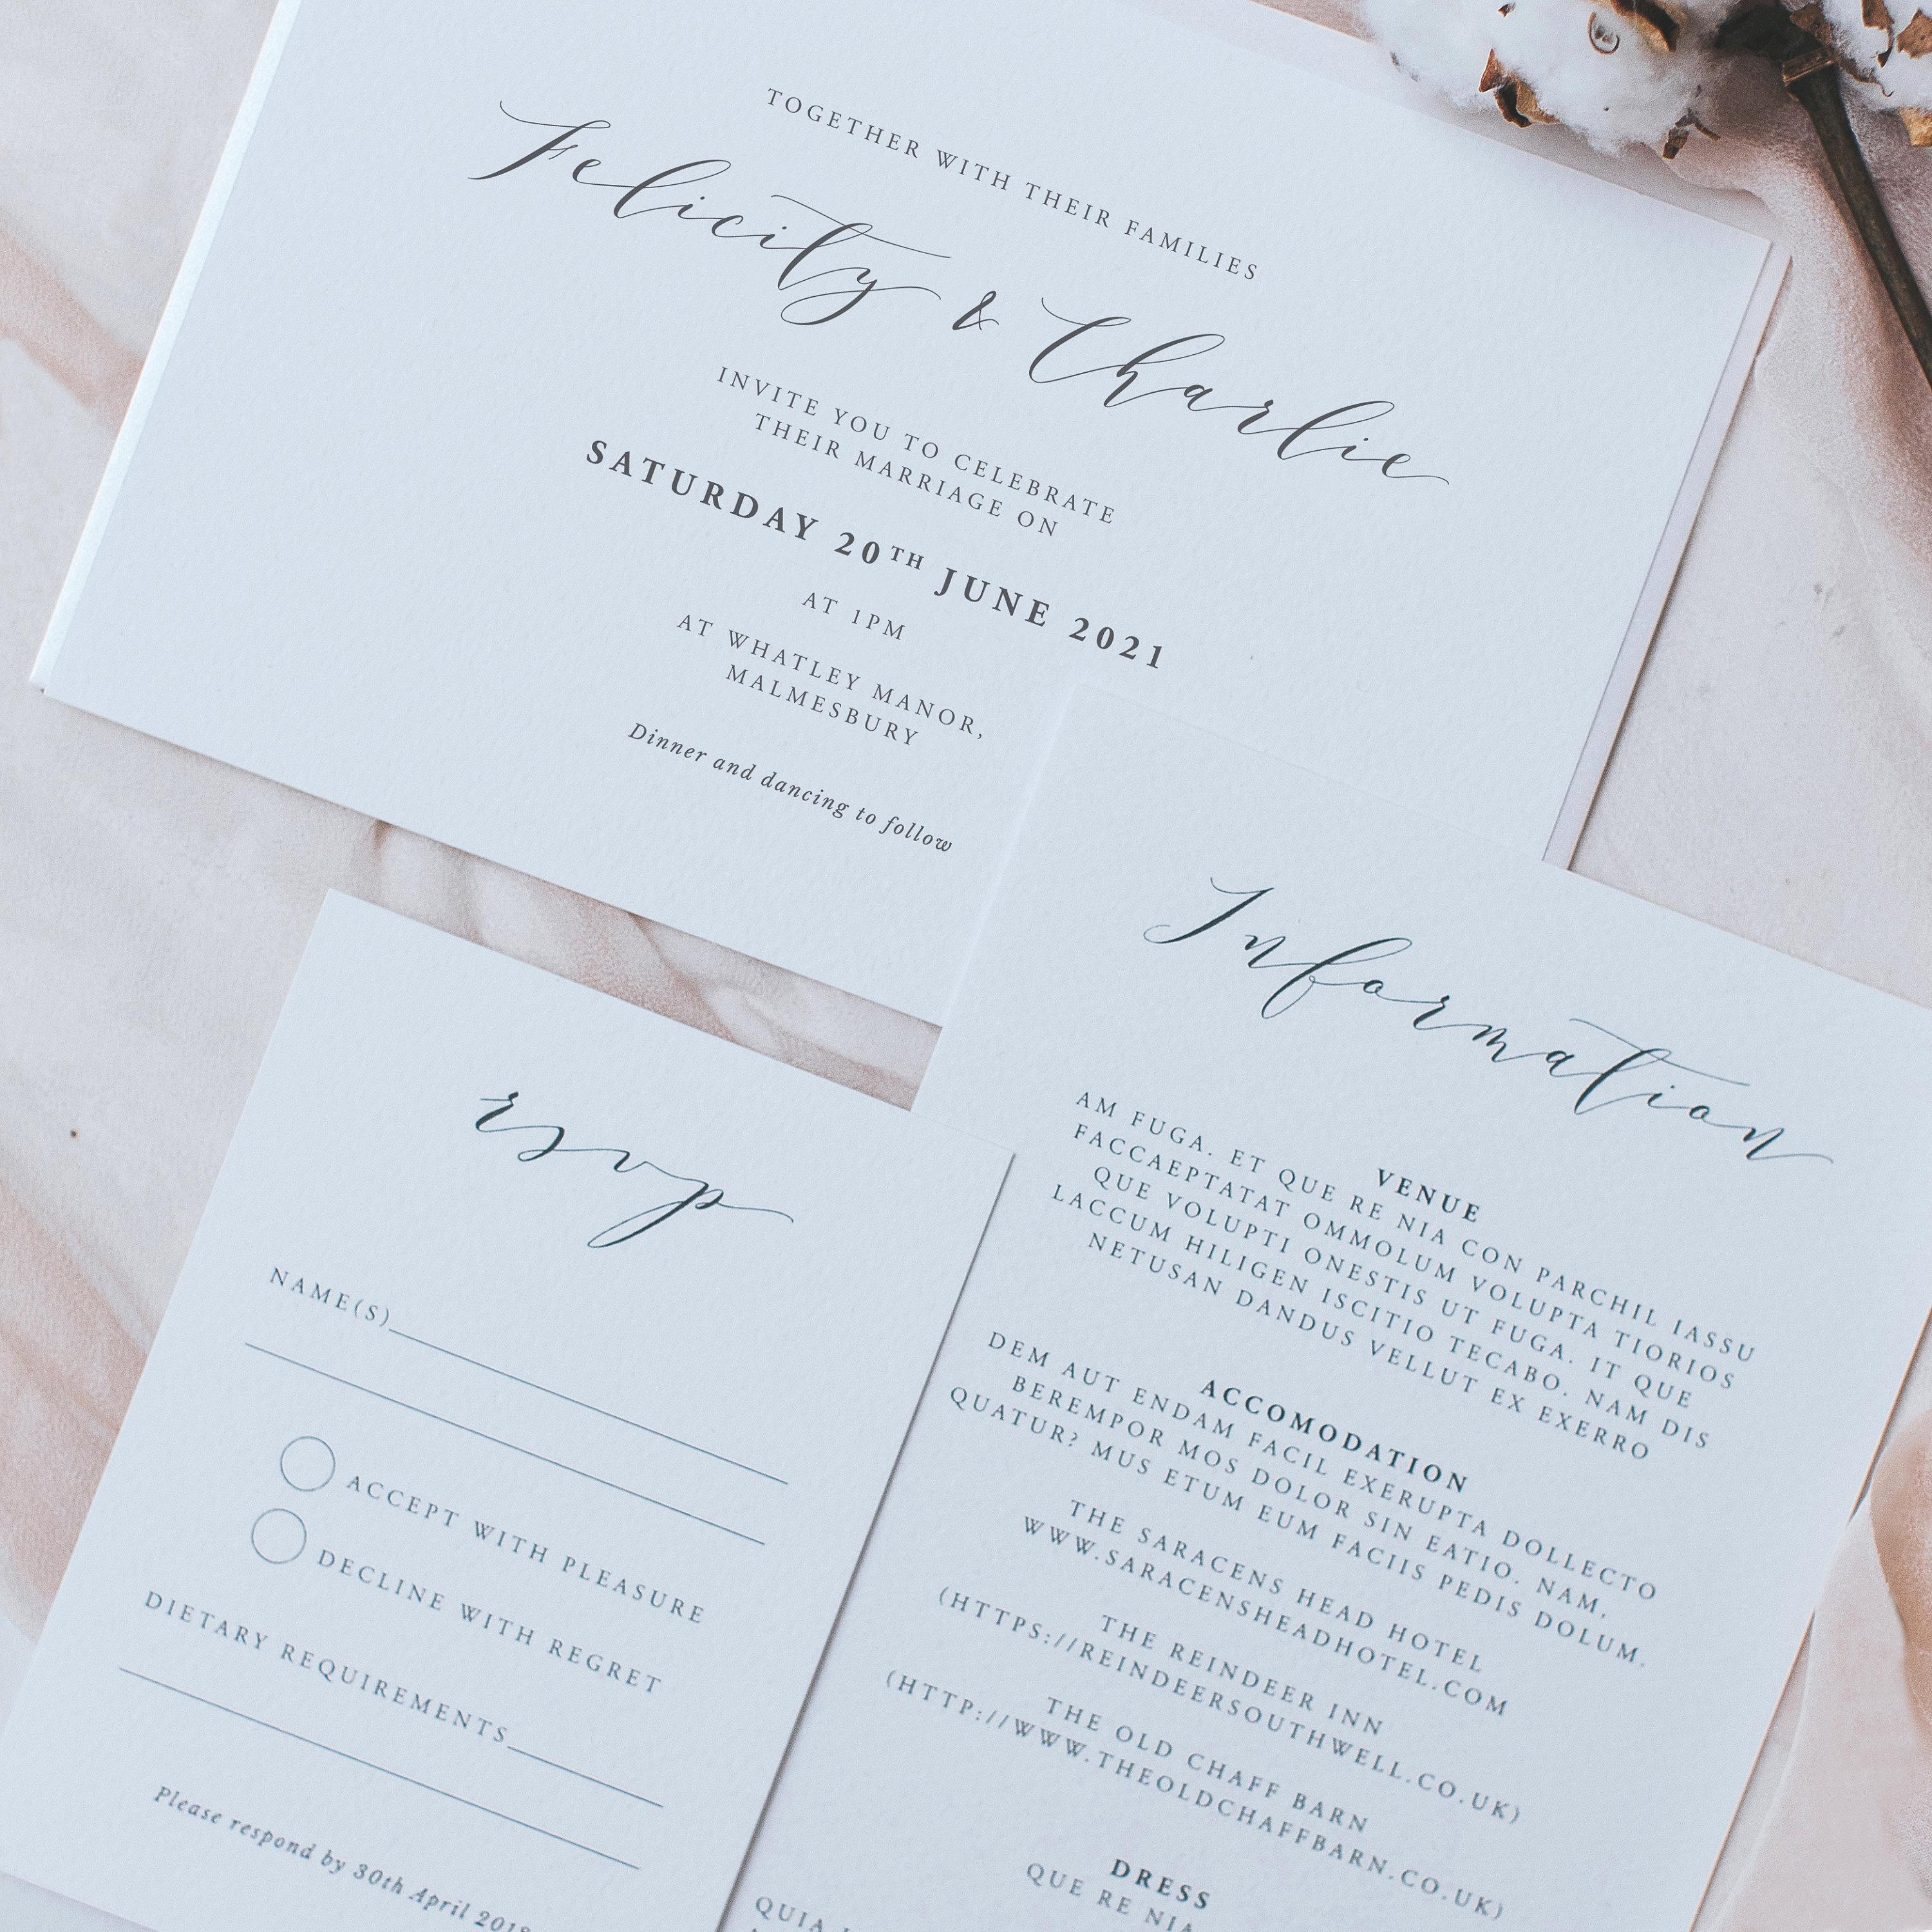 Beautiful & Sophisticated Wedding Invitation Suite With Script Calligraphy Classic Fonts - Invite, Information Card, Rsvp & Envelope